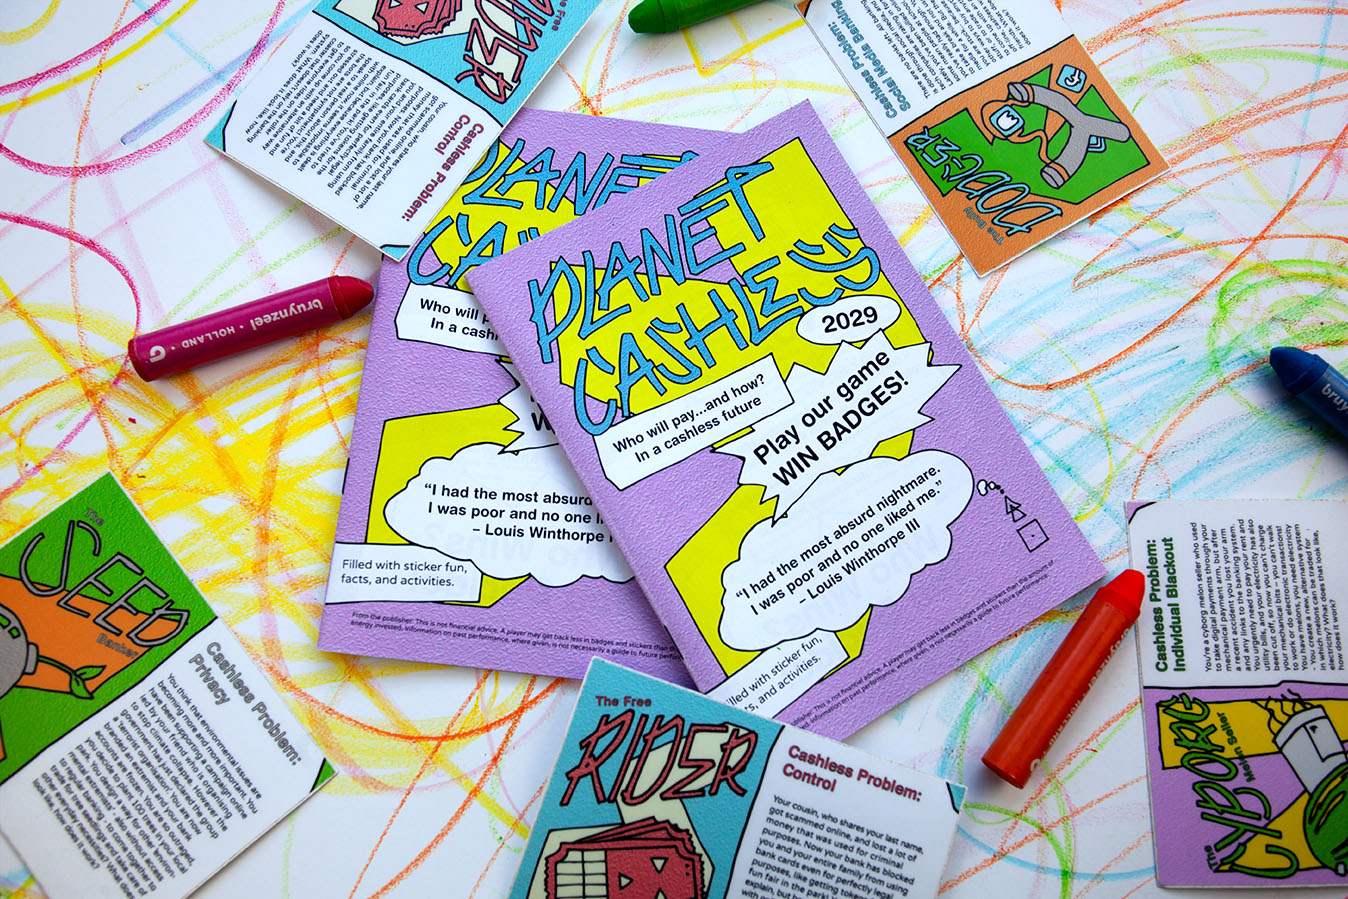 alt: Planet Cashless booklets are laying on a table which has been drawn all over by children, around the booklets crayons and stickers can be seen